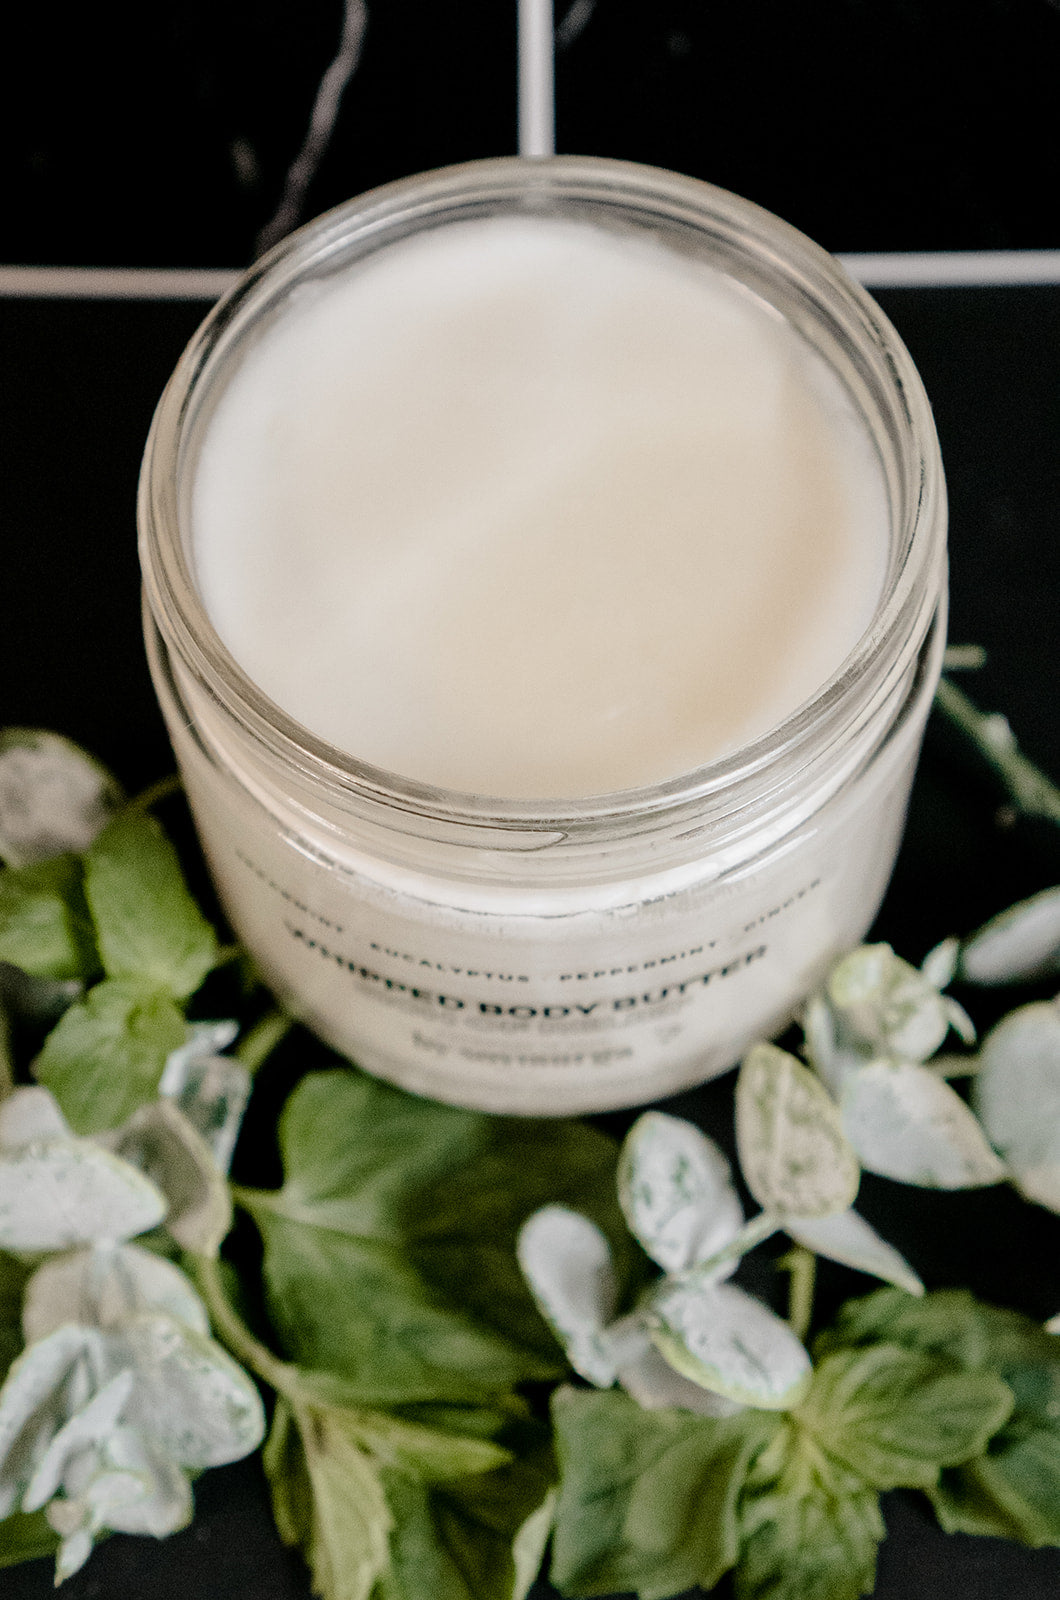 Sigh of Relief - Whipped Body Butter